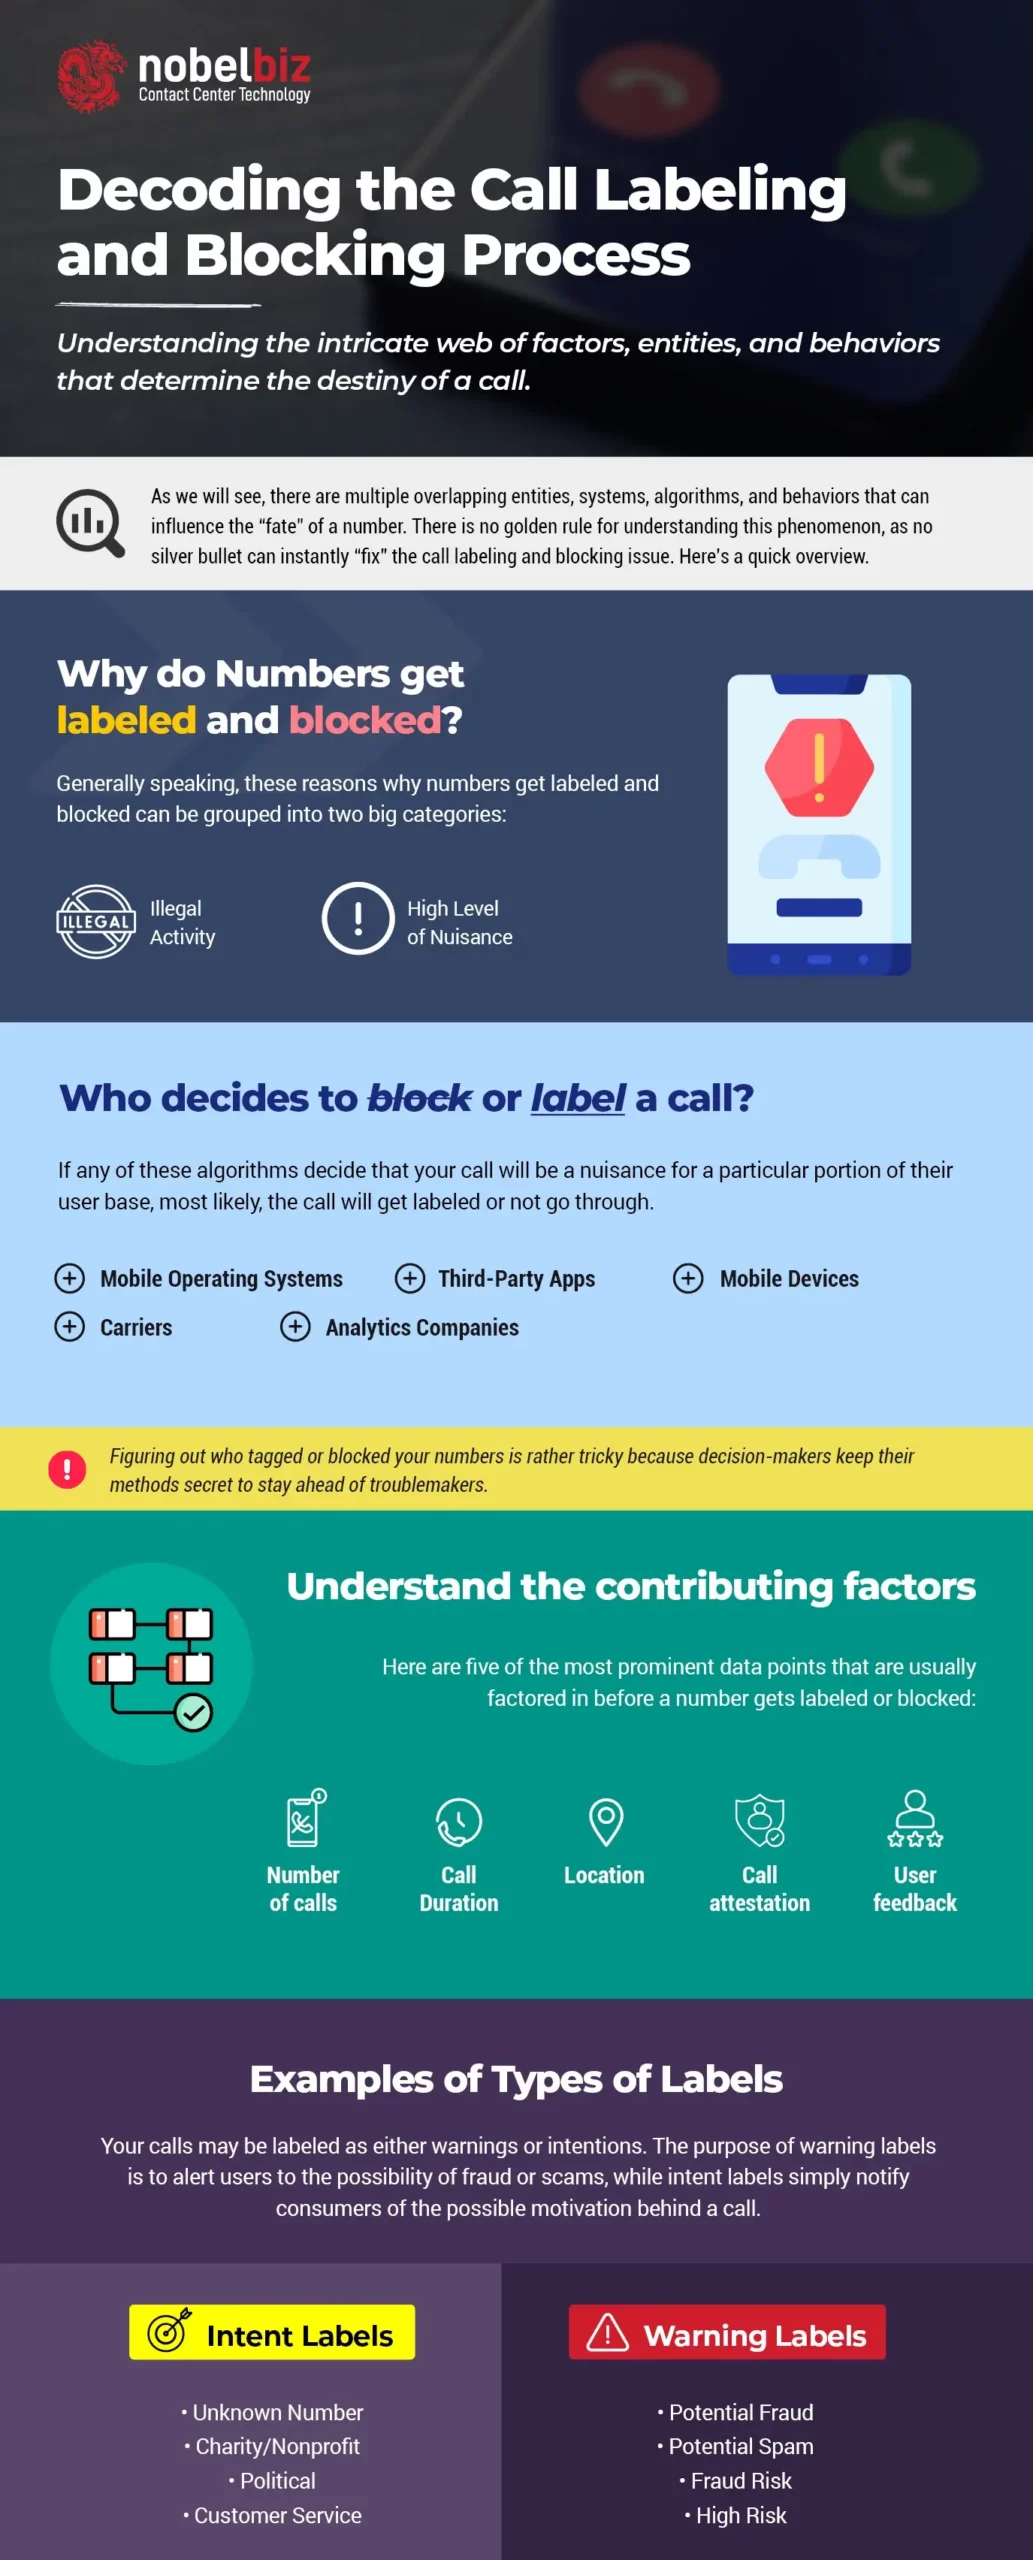 Decoding the Call Labeling and Blocking Process